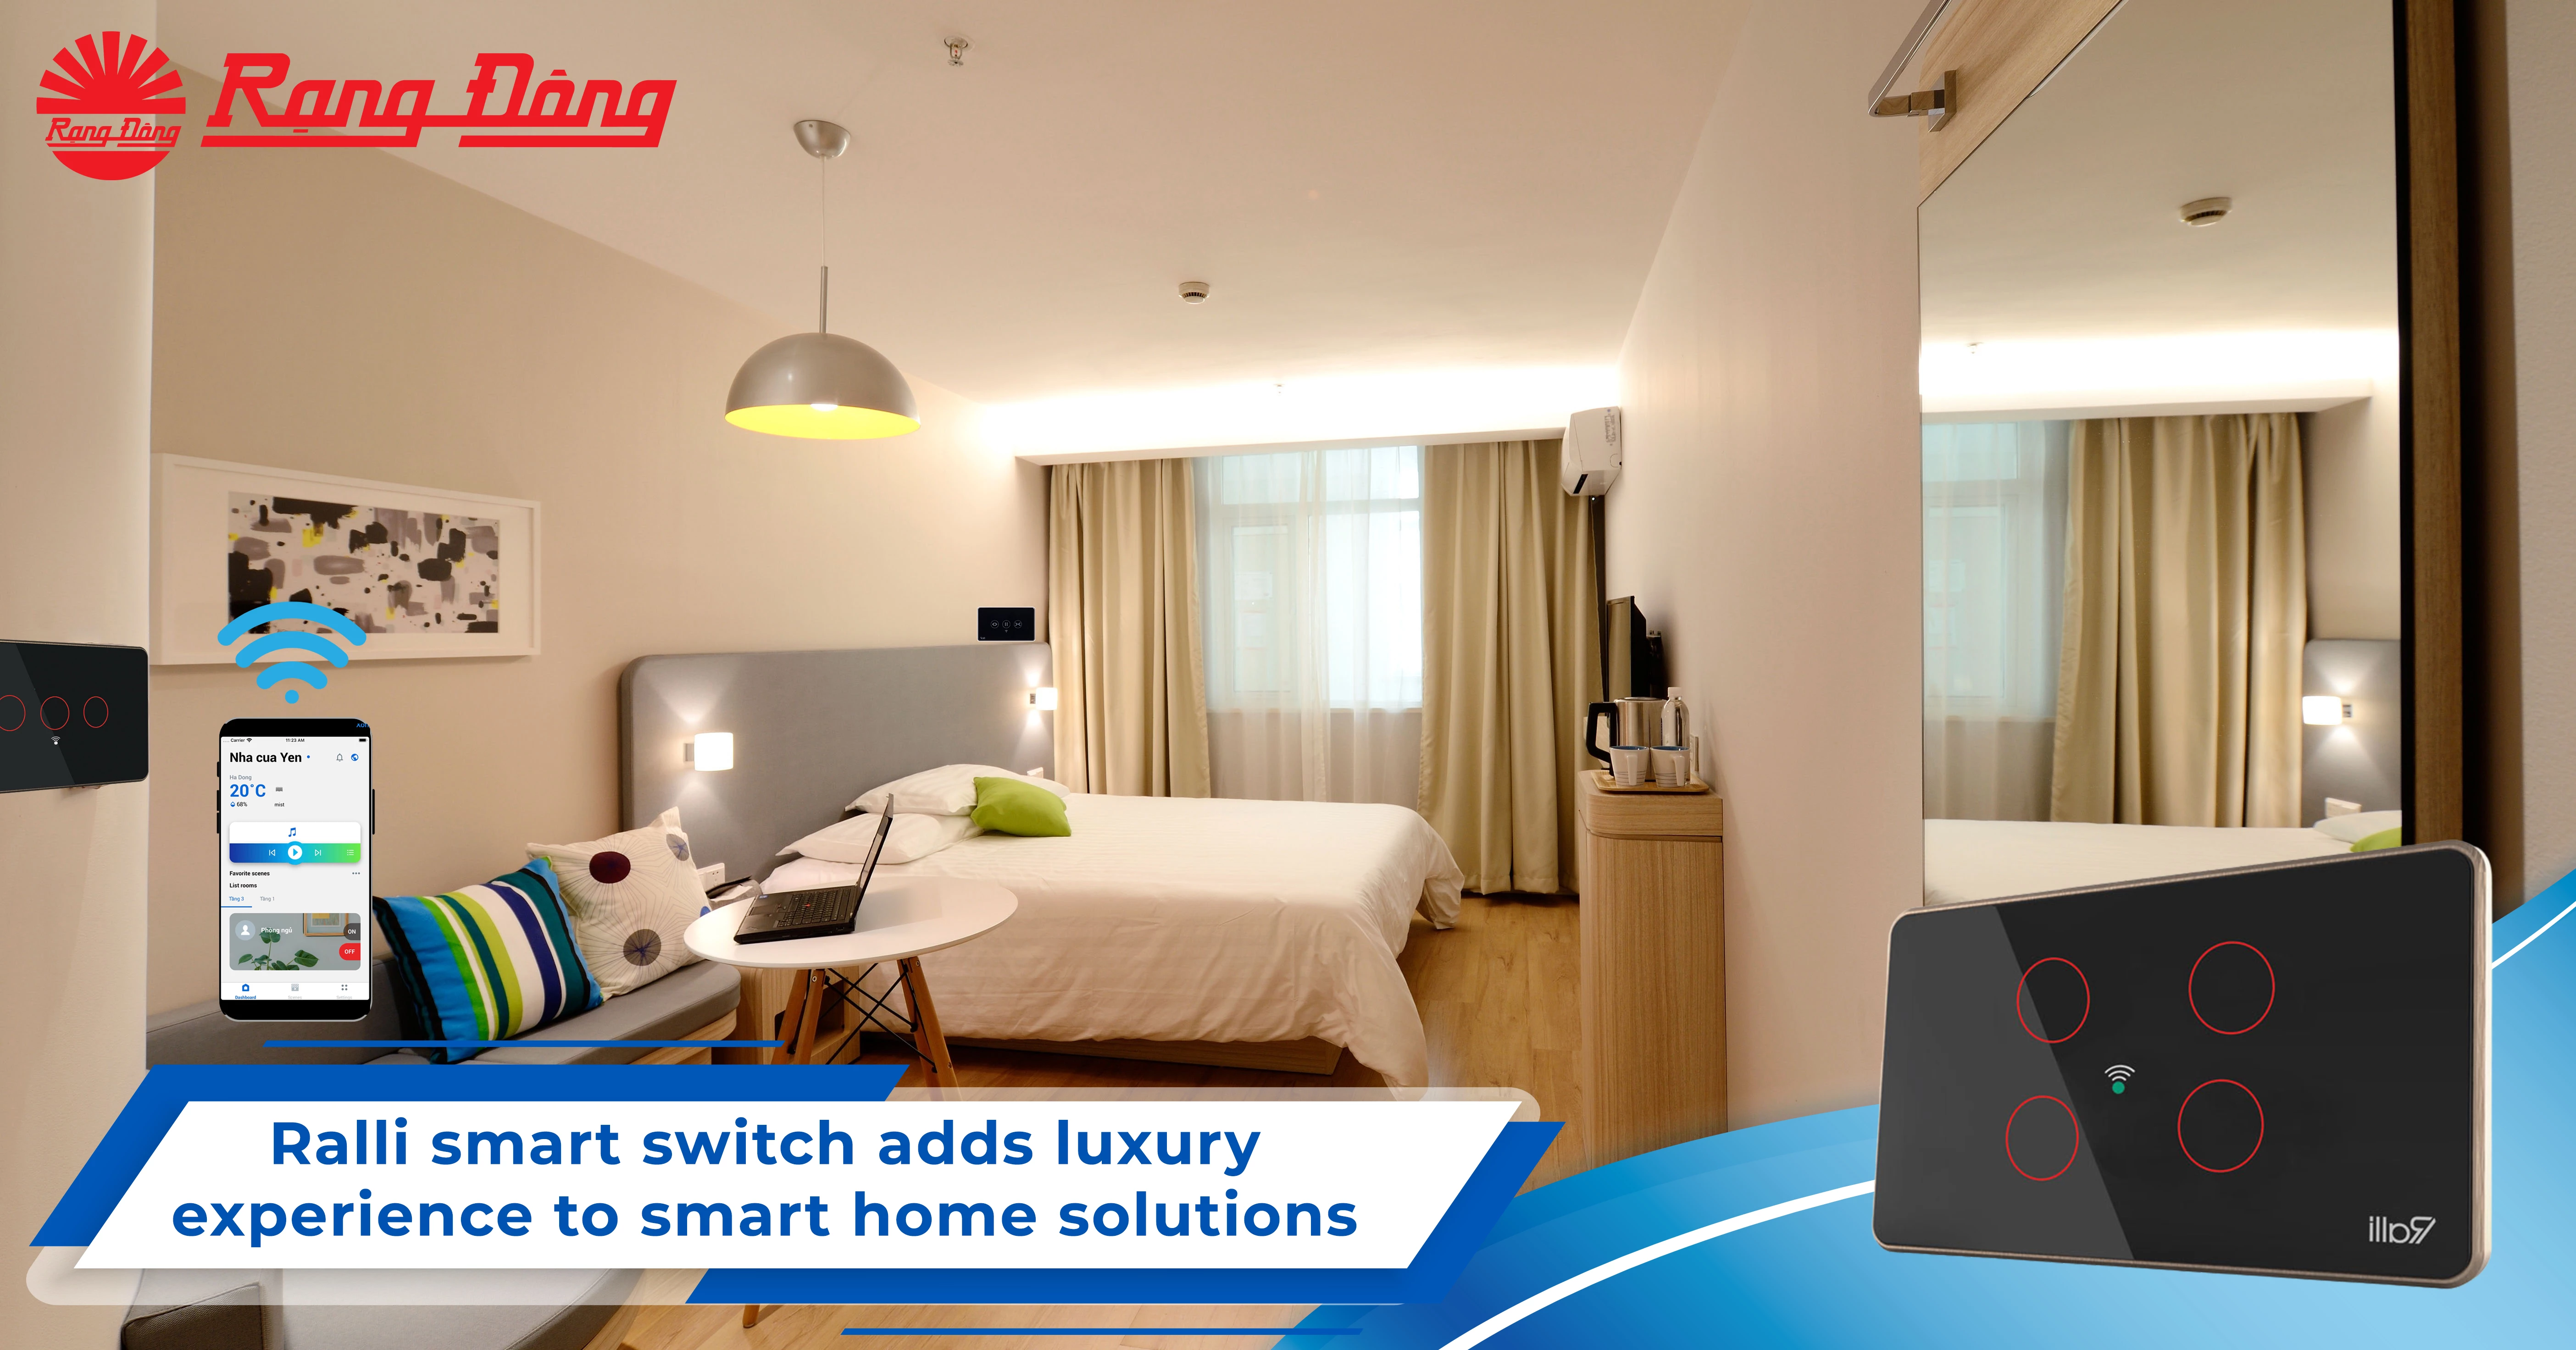 Ralli smart switch adds luxury experience to smart home solutions